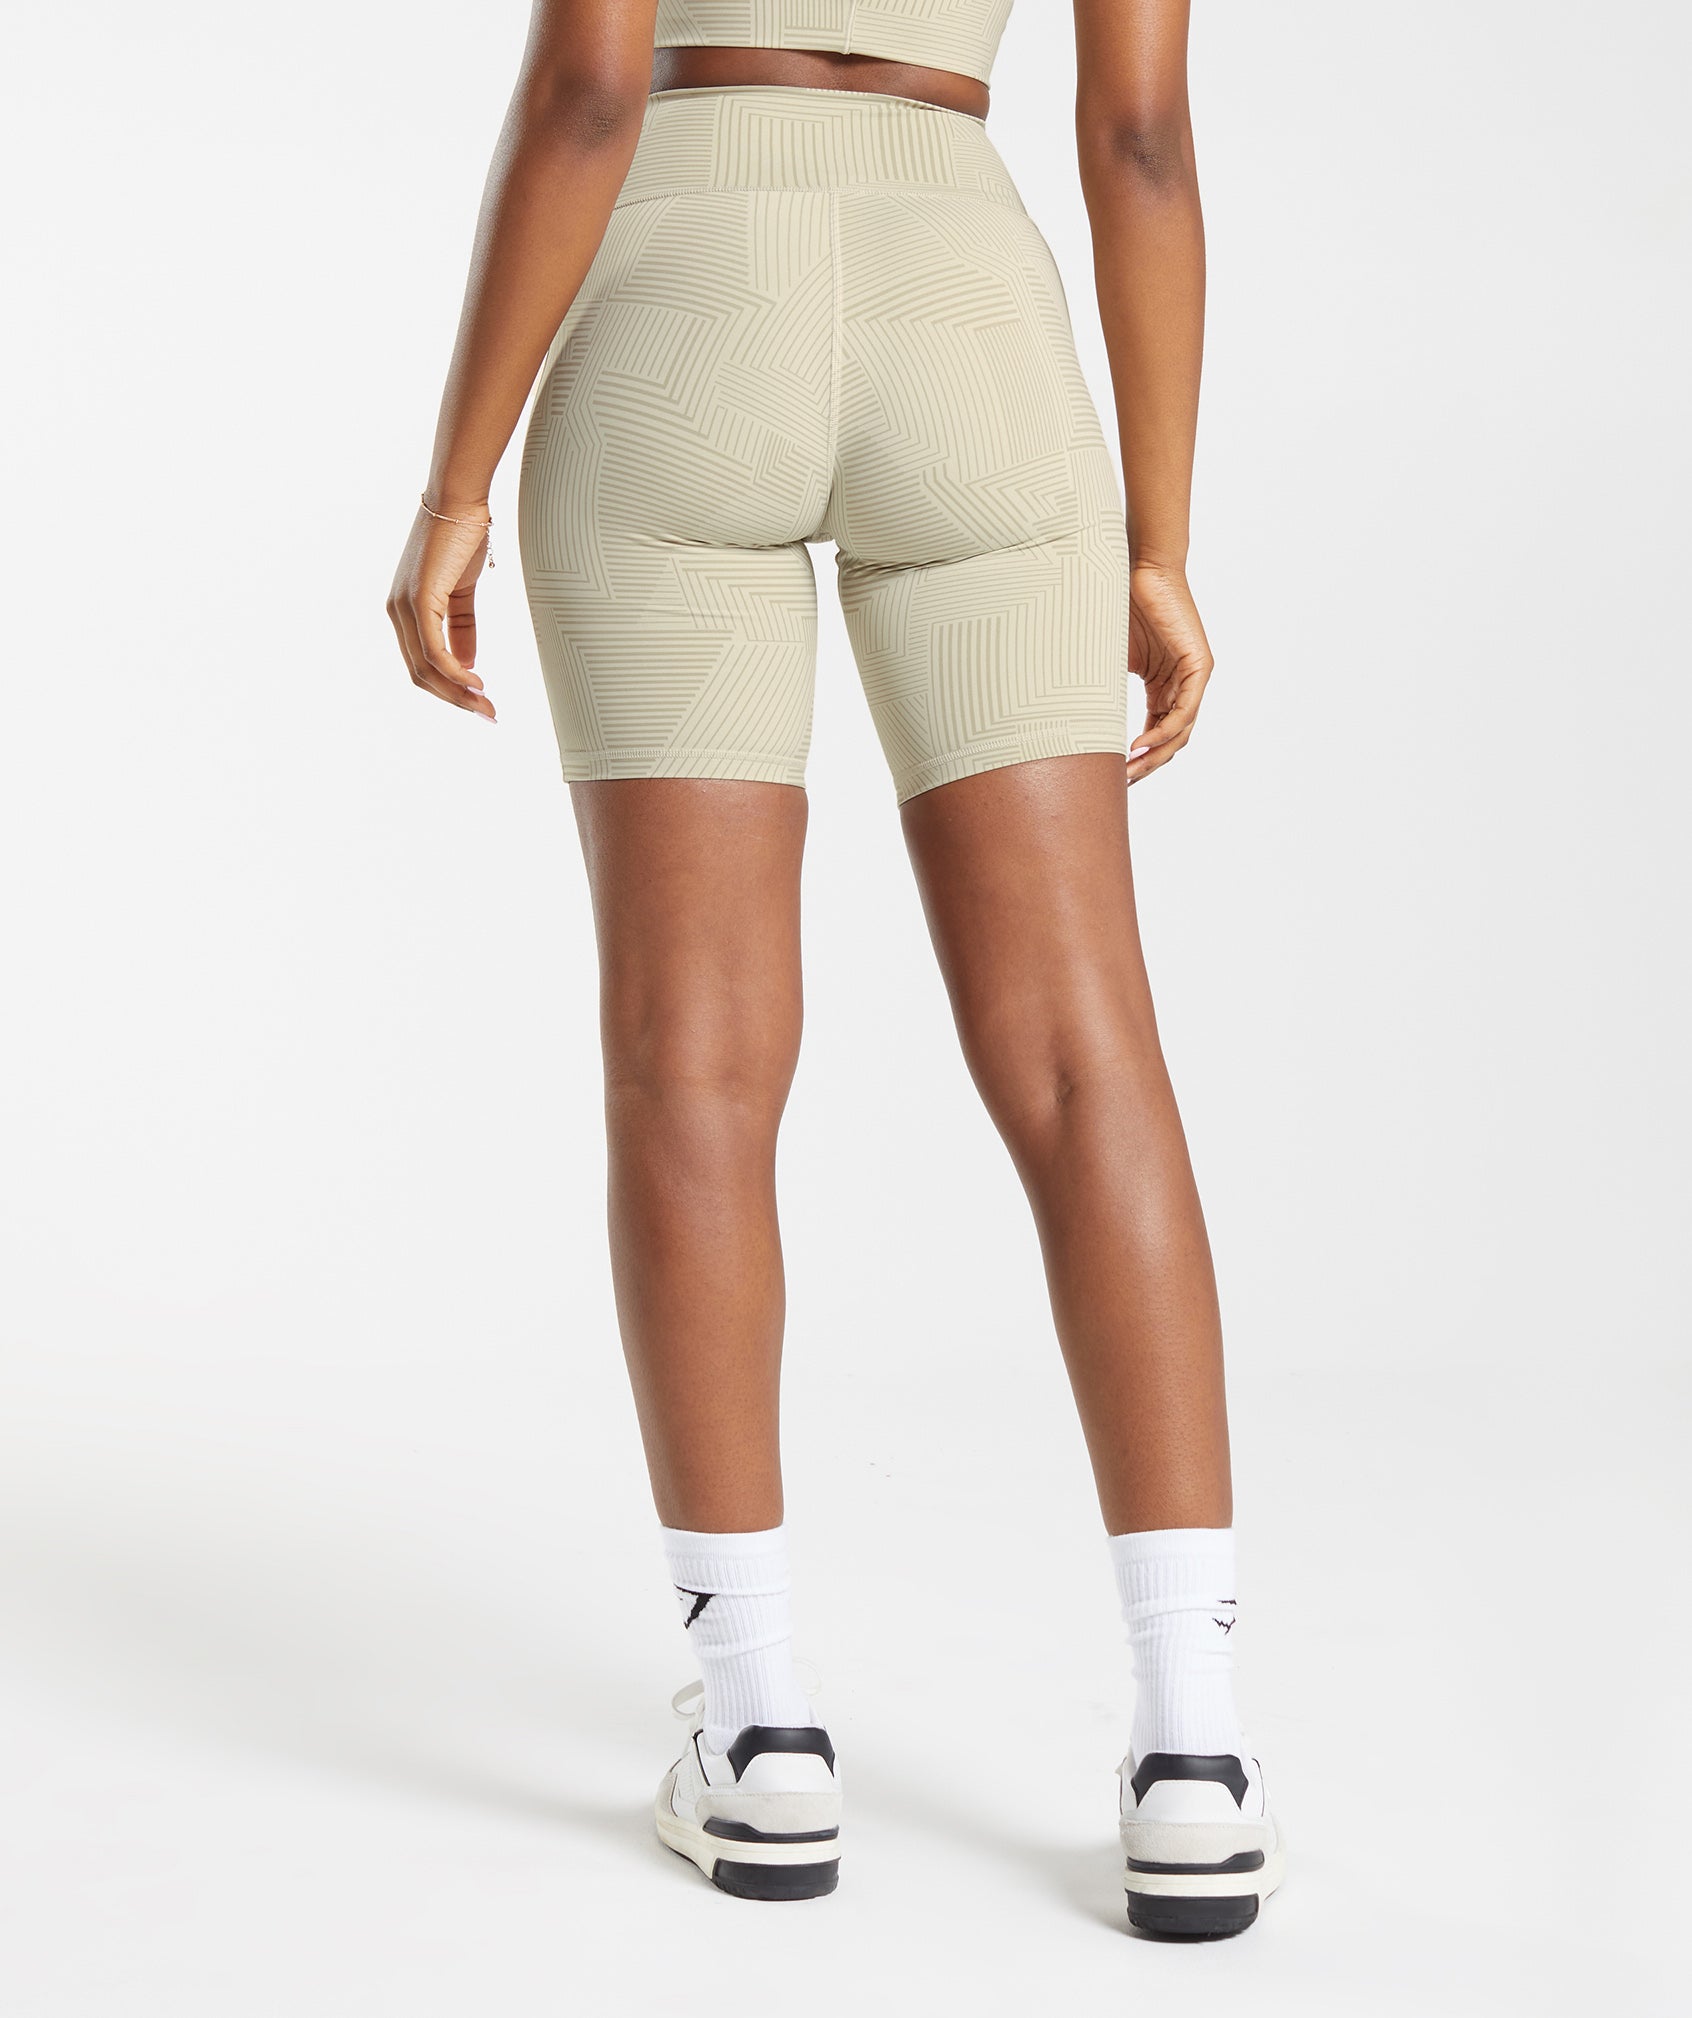 Elevate Cycling Shorts product image 5